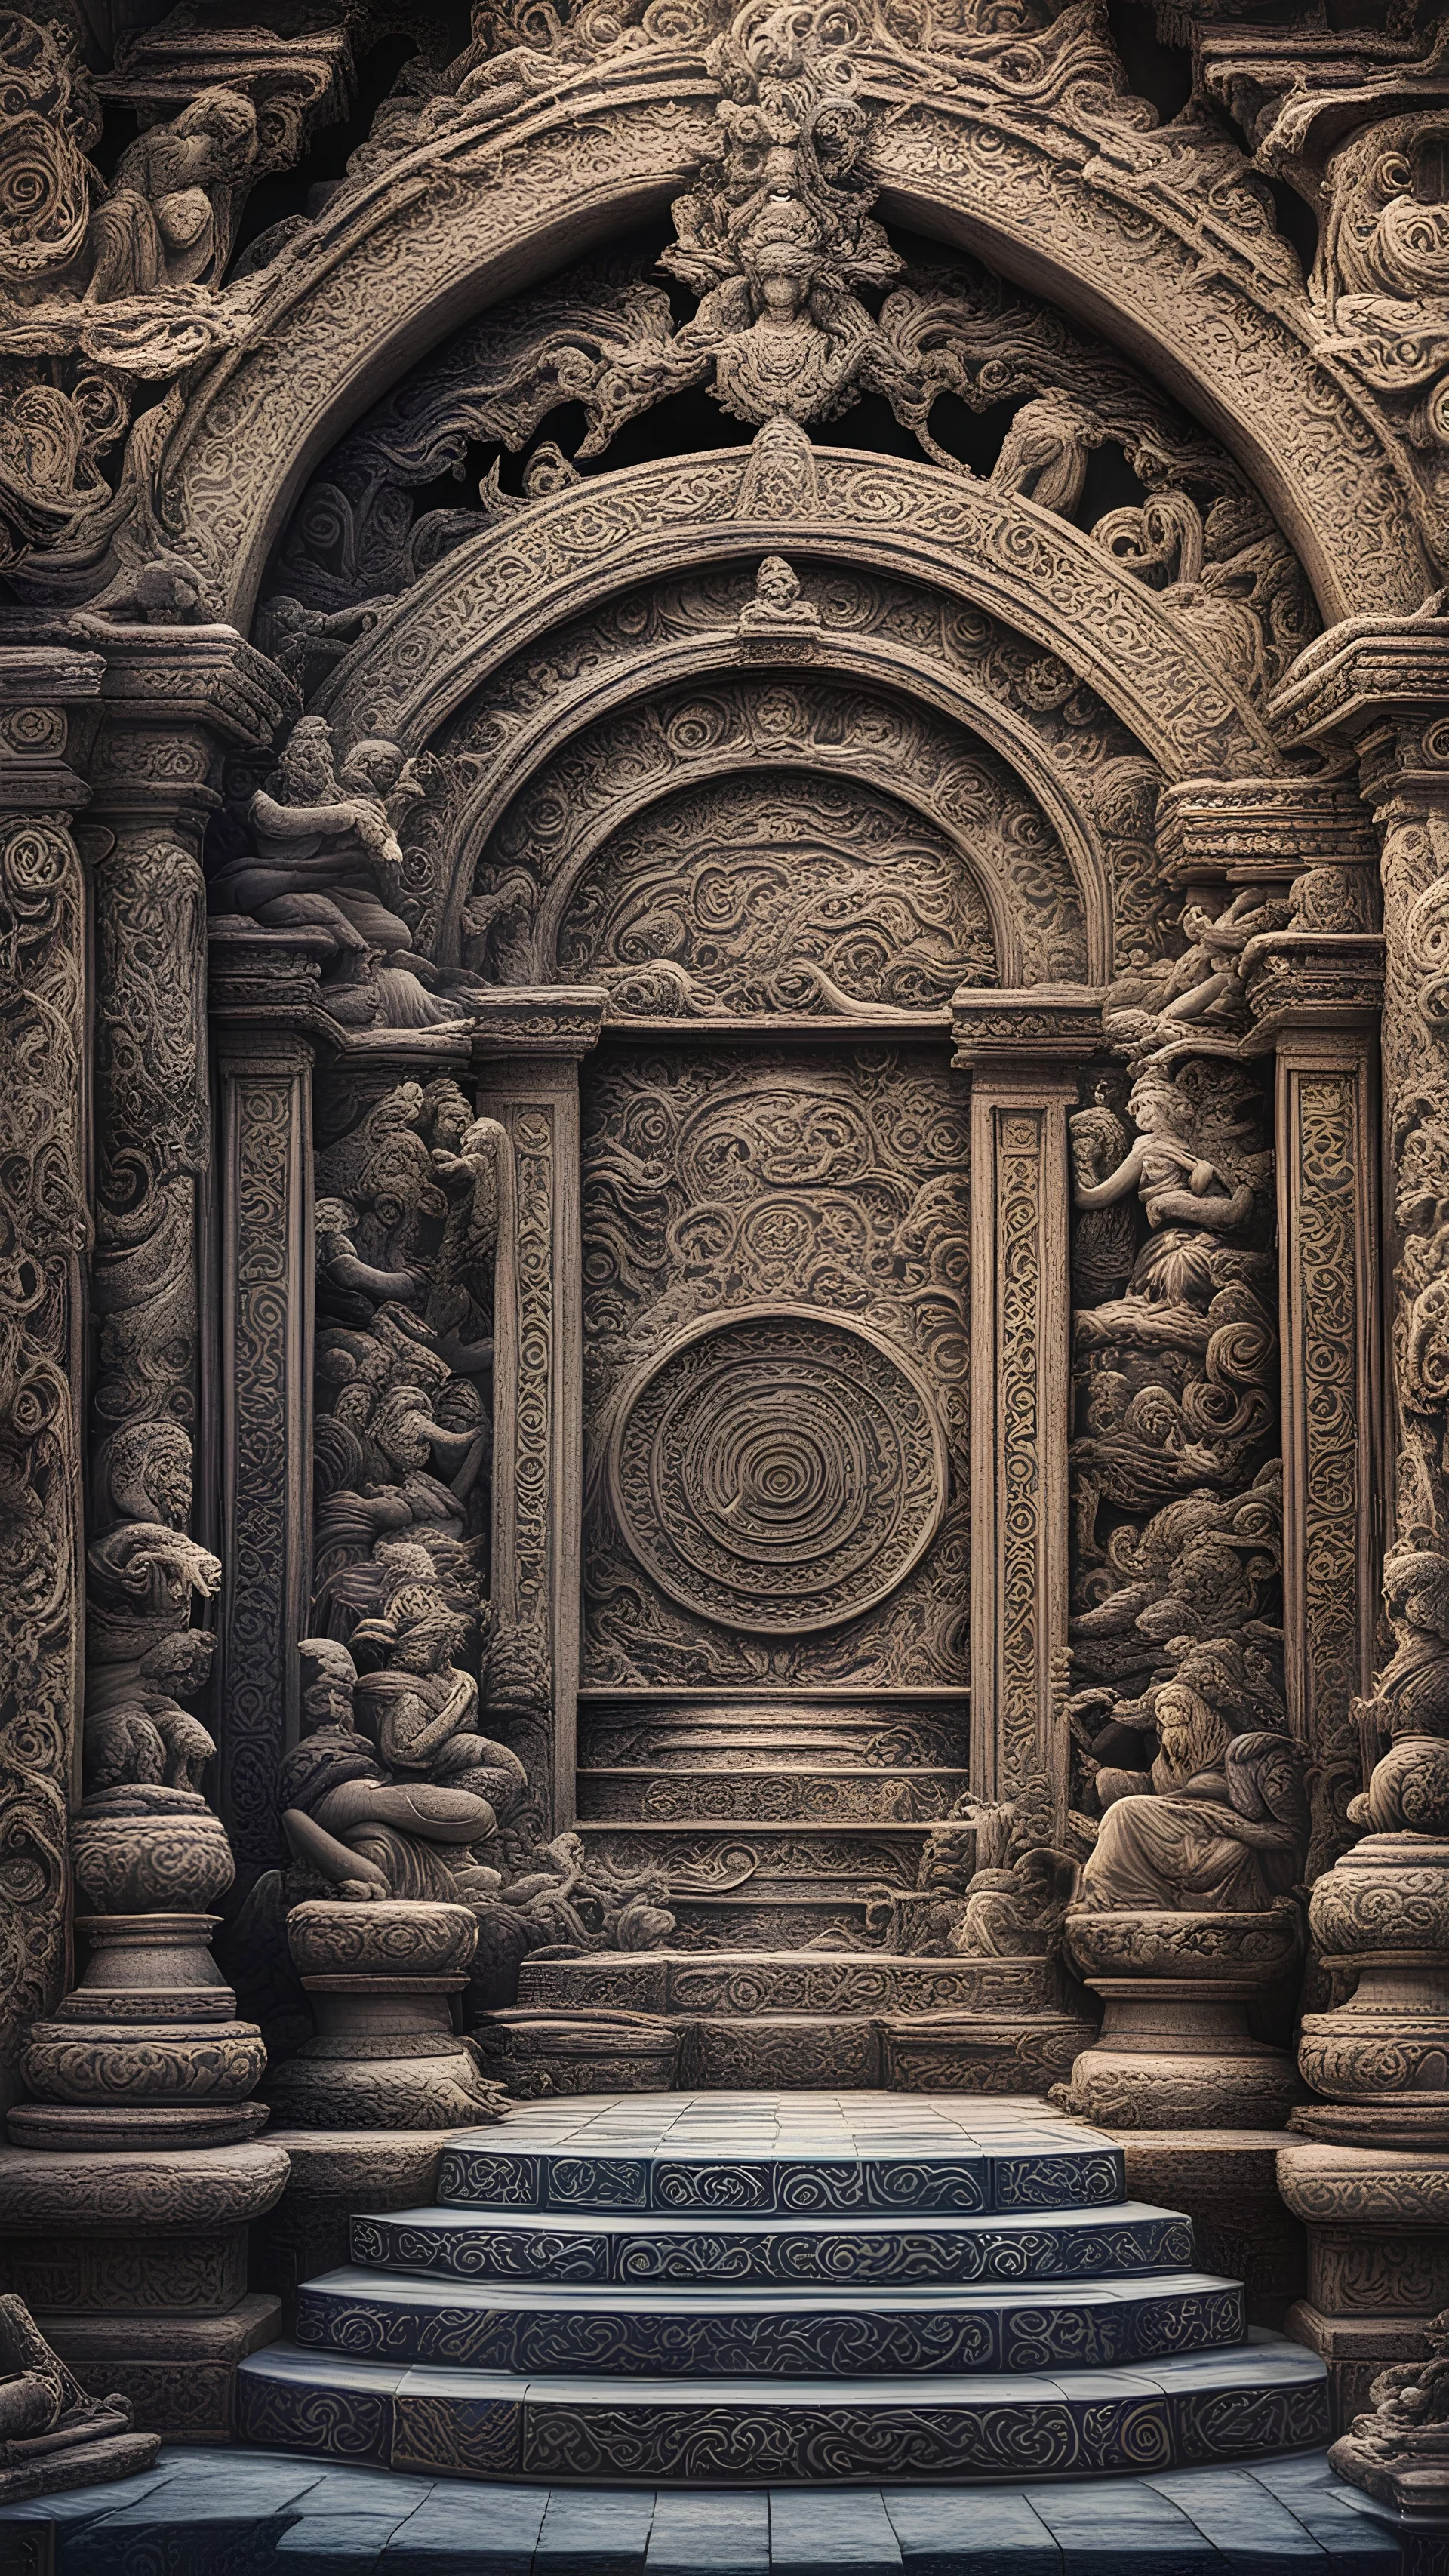 a scene of an ancient temple where elemental magic thrives, with intricate carvings depicting powerful deities and mystical rituals taking place amidst swirling energies